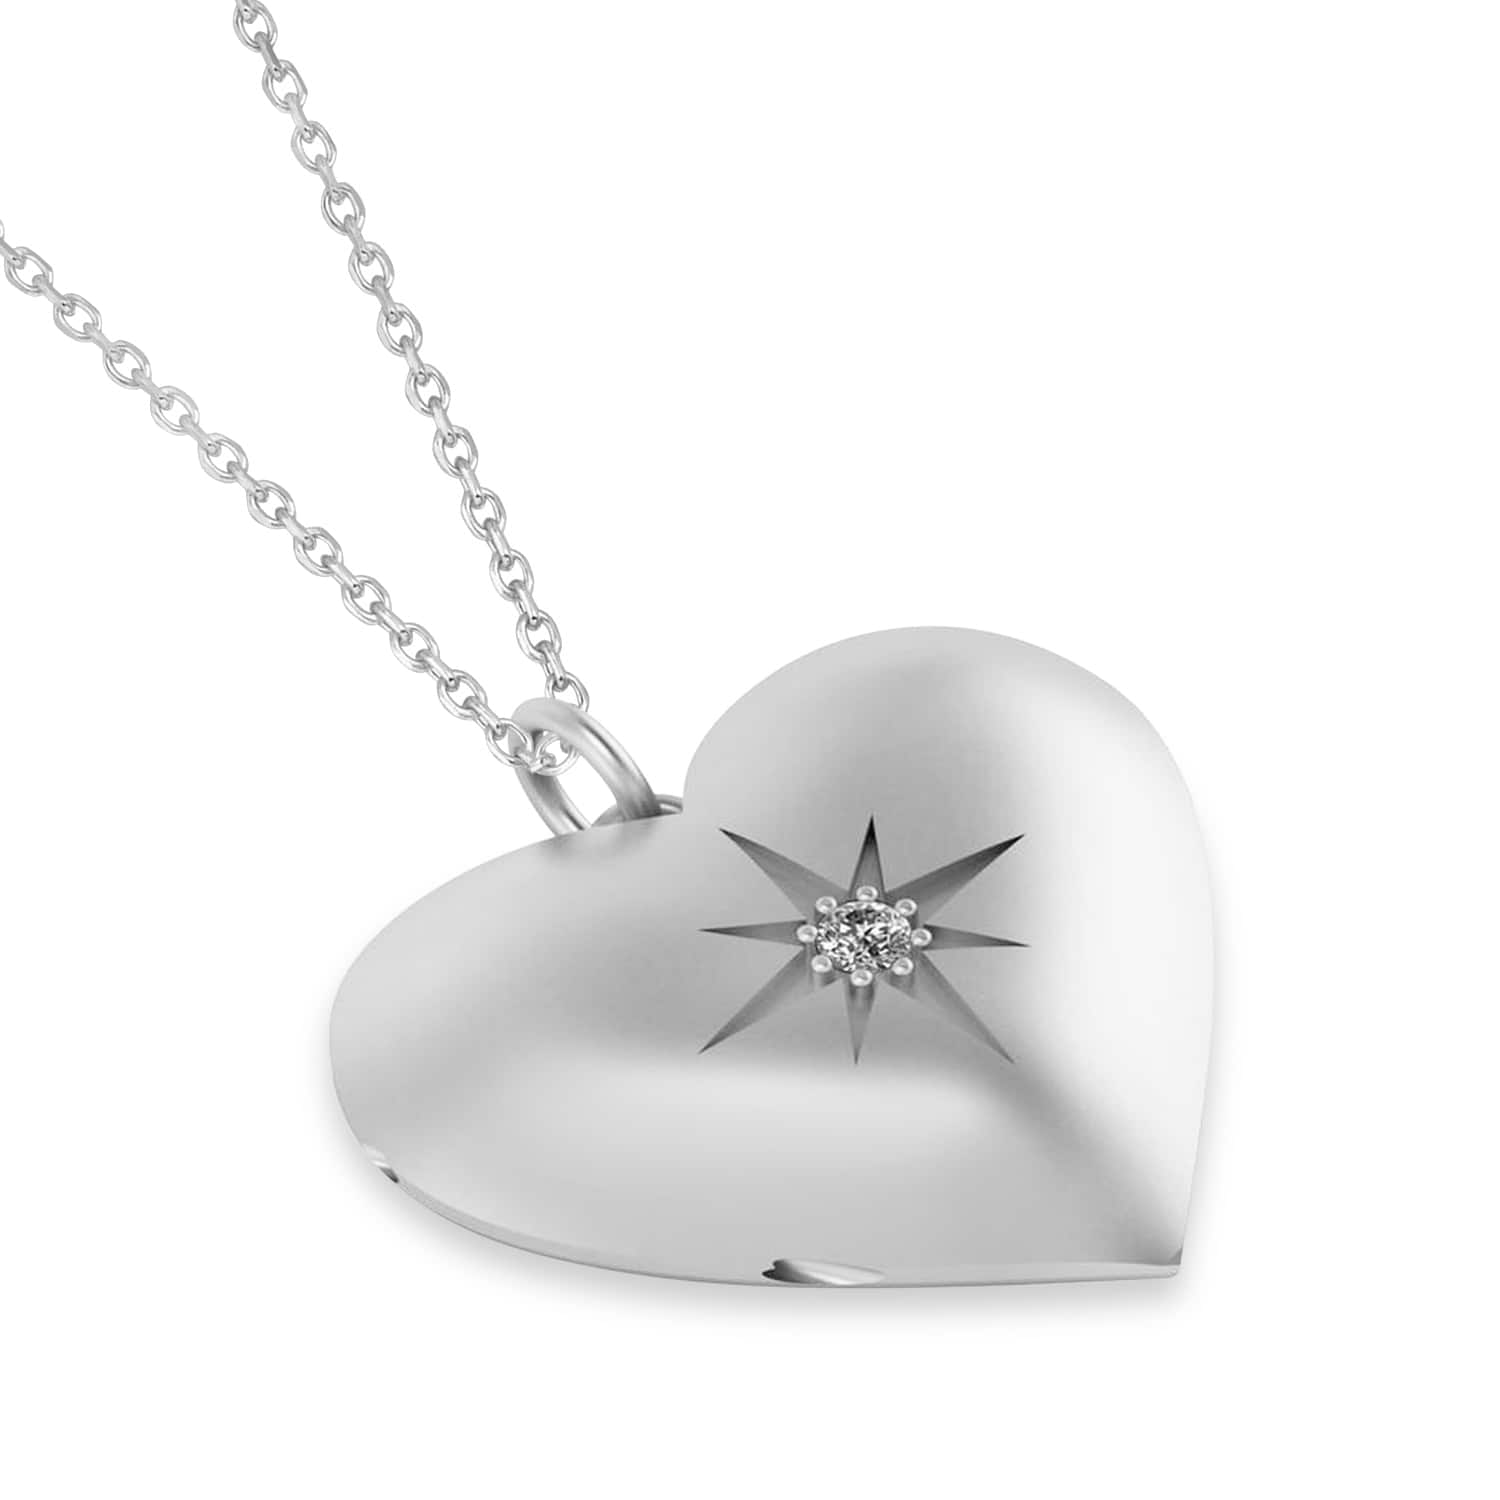 Heart with Compass Rose Locket Necklace 14k White Gold